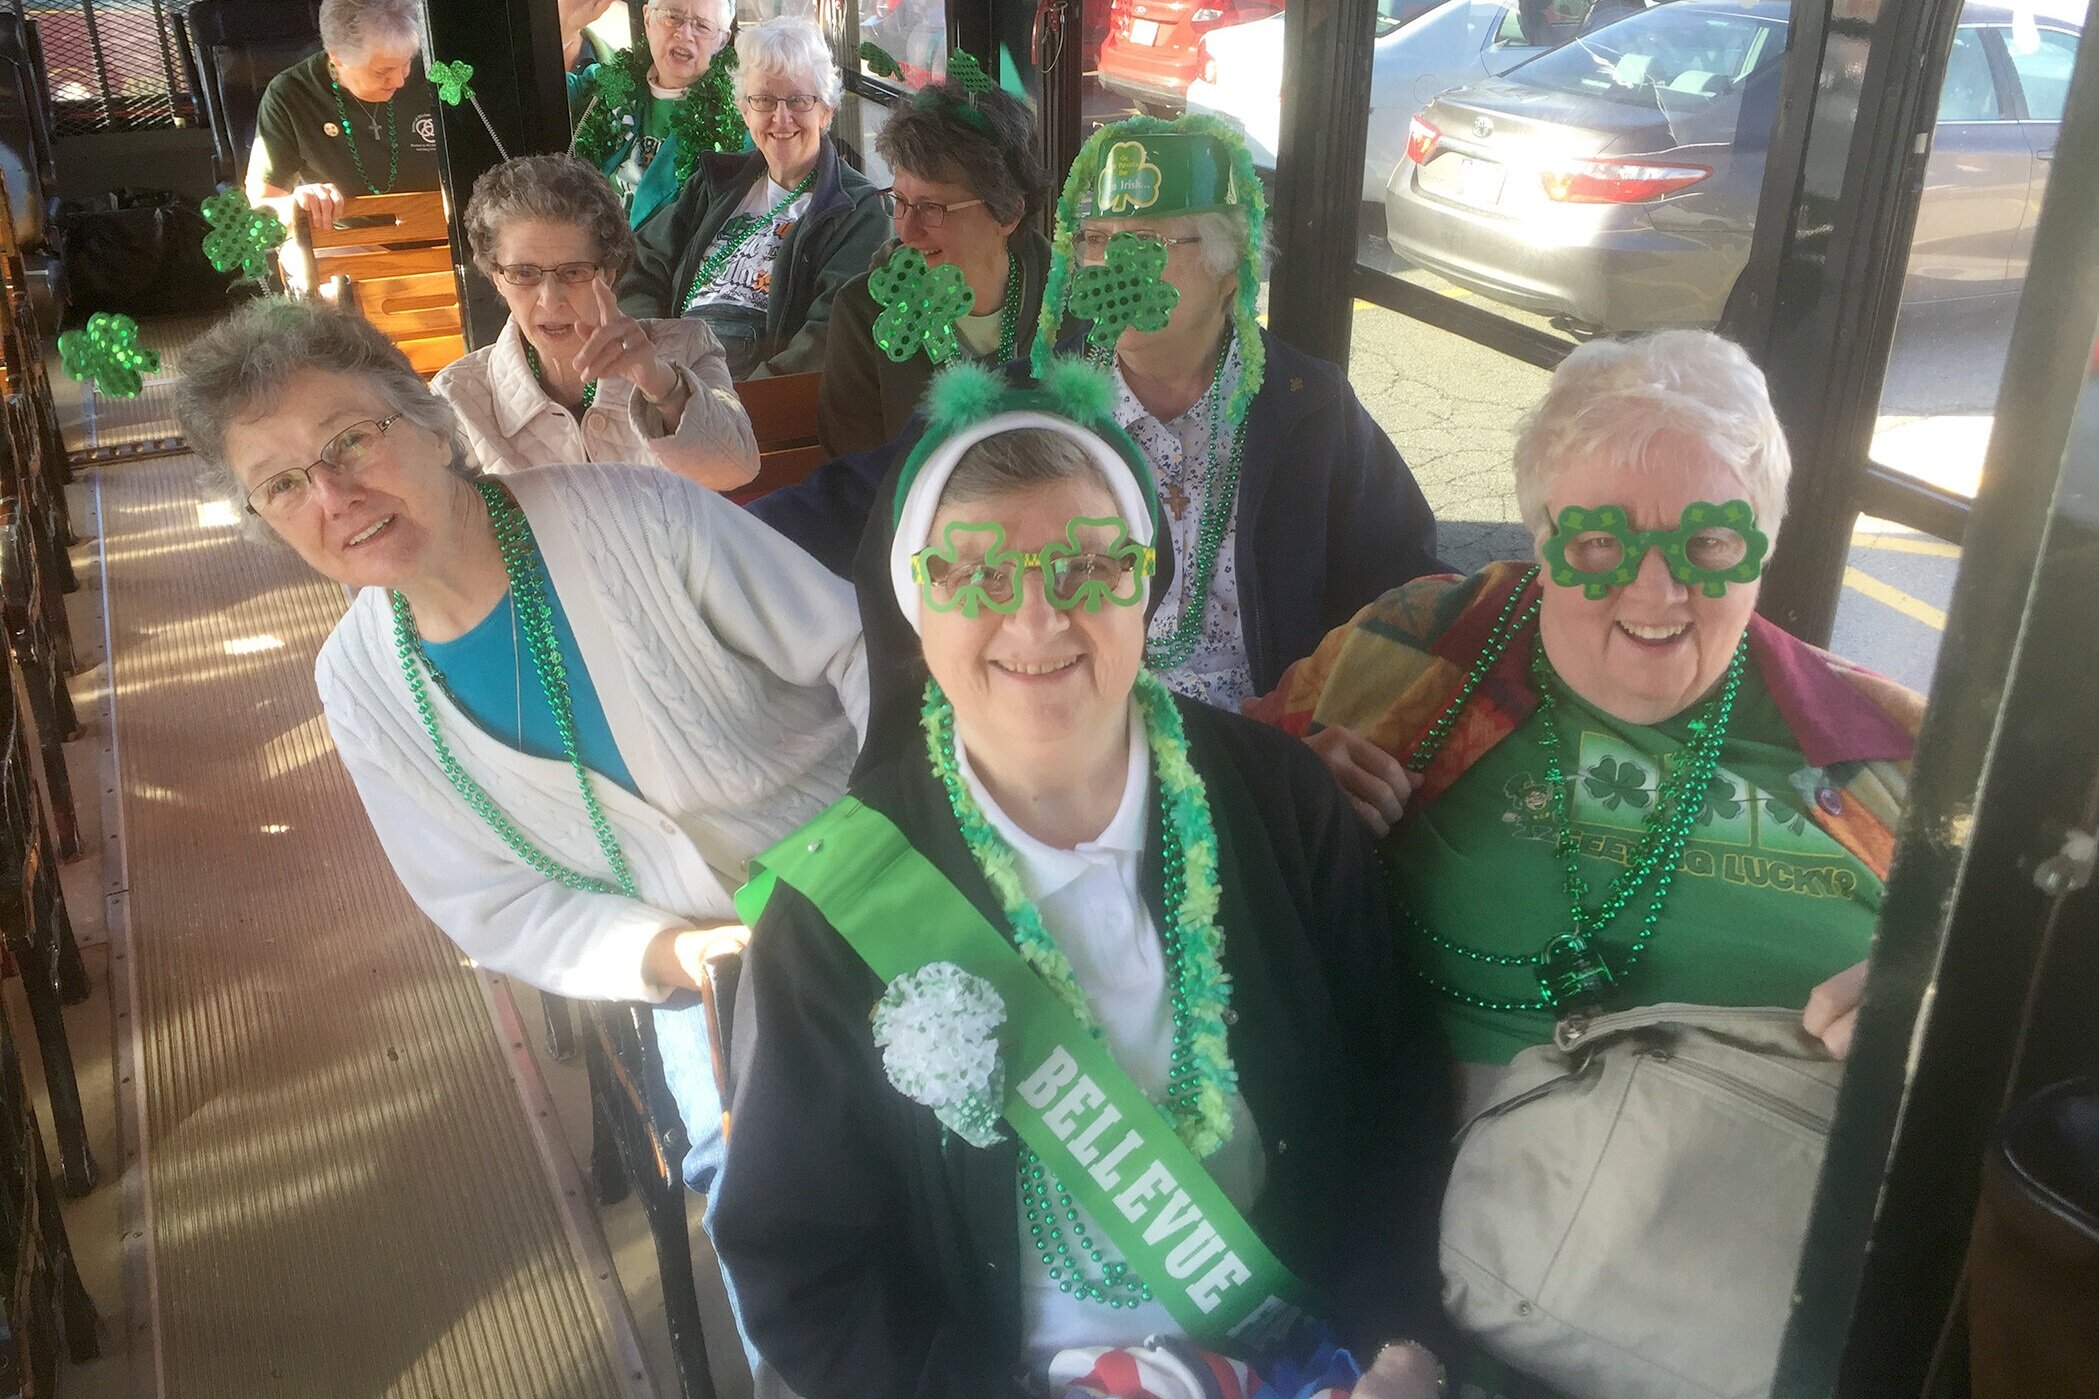  Sister Jeanne Marie Ulica (foreground) takes part in the City of Pittsburgh St. Patrick’s Day Parade along with other Catholic sisters from Western Pennsylvania. 